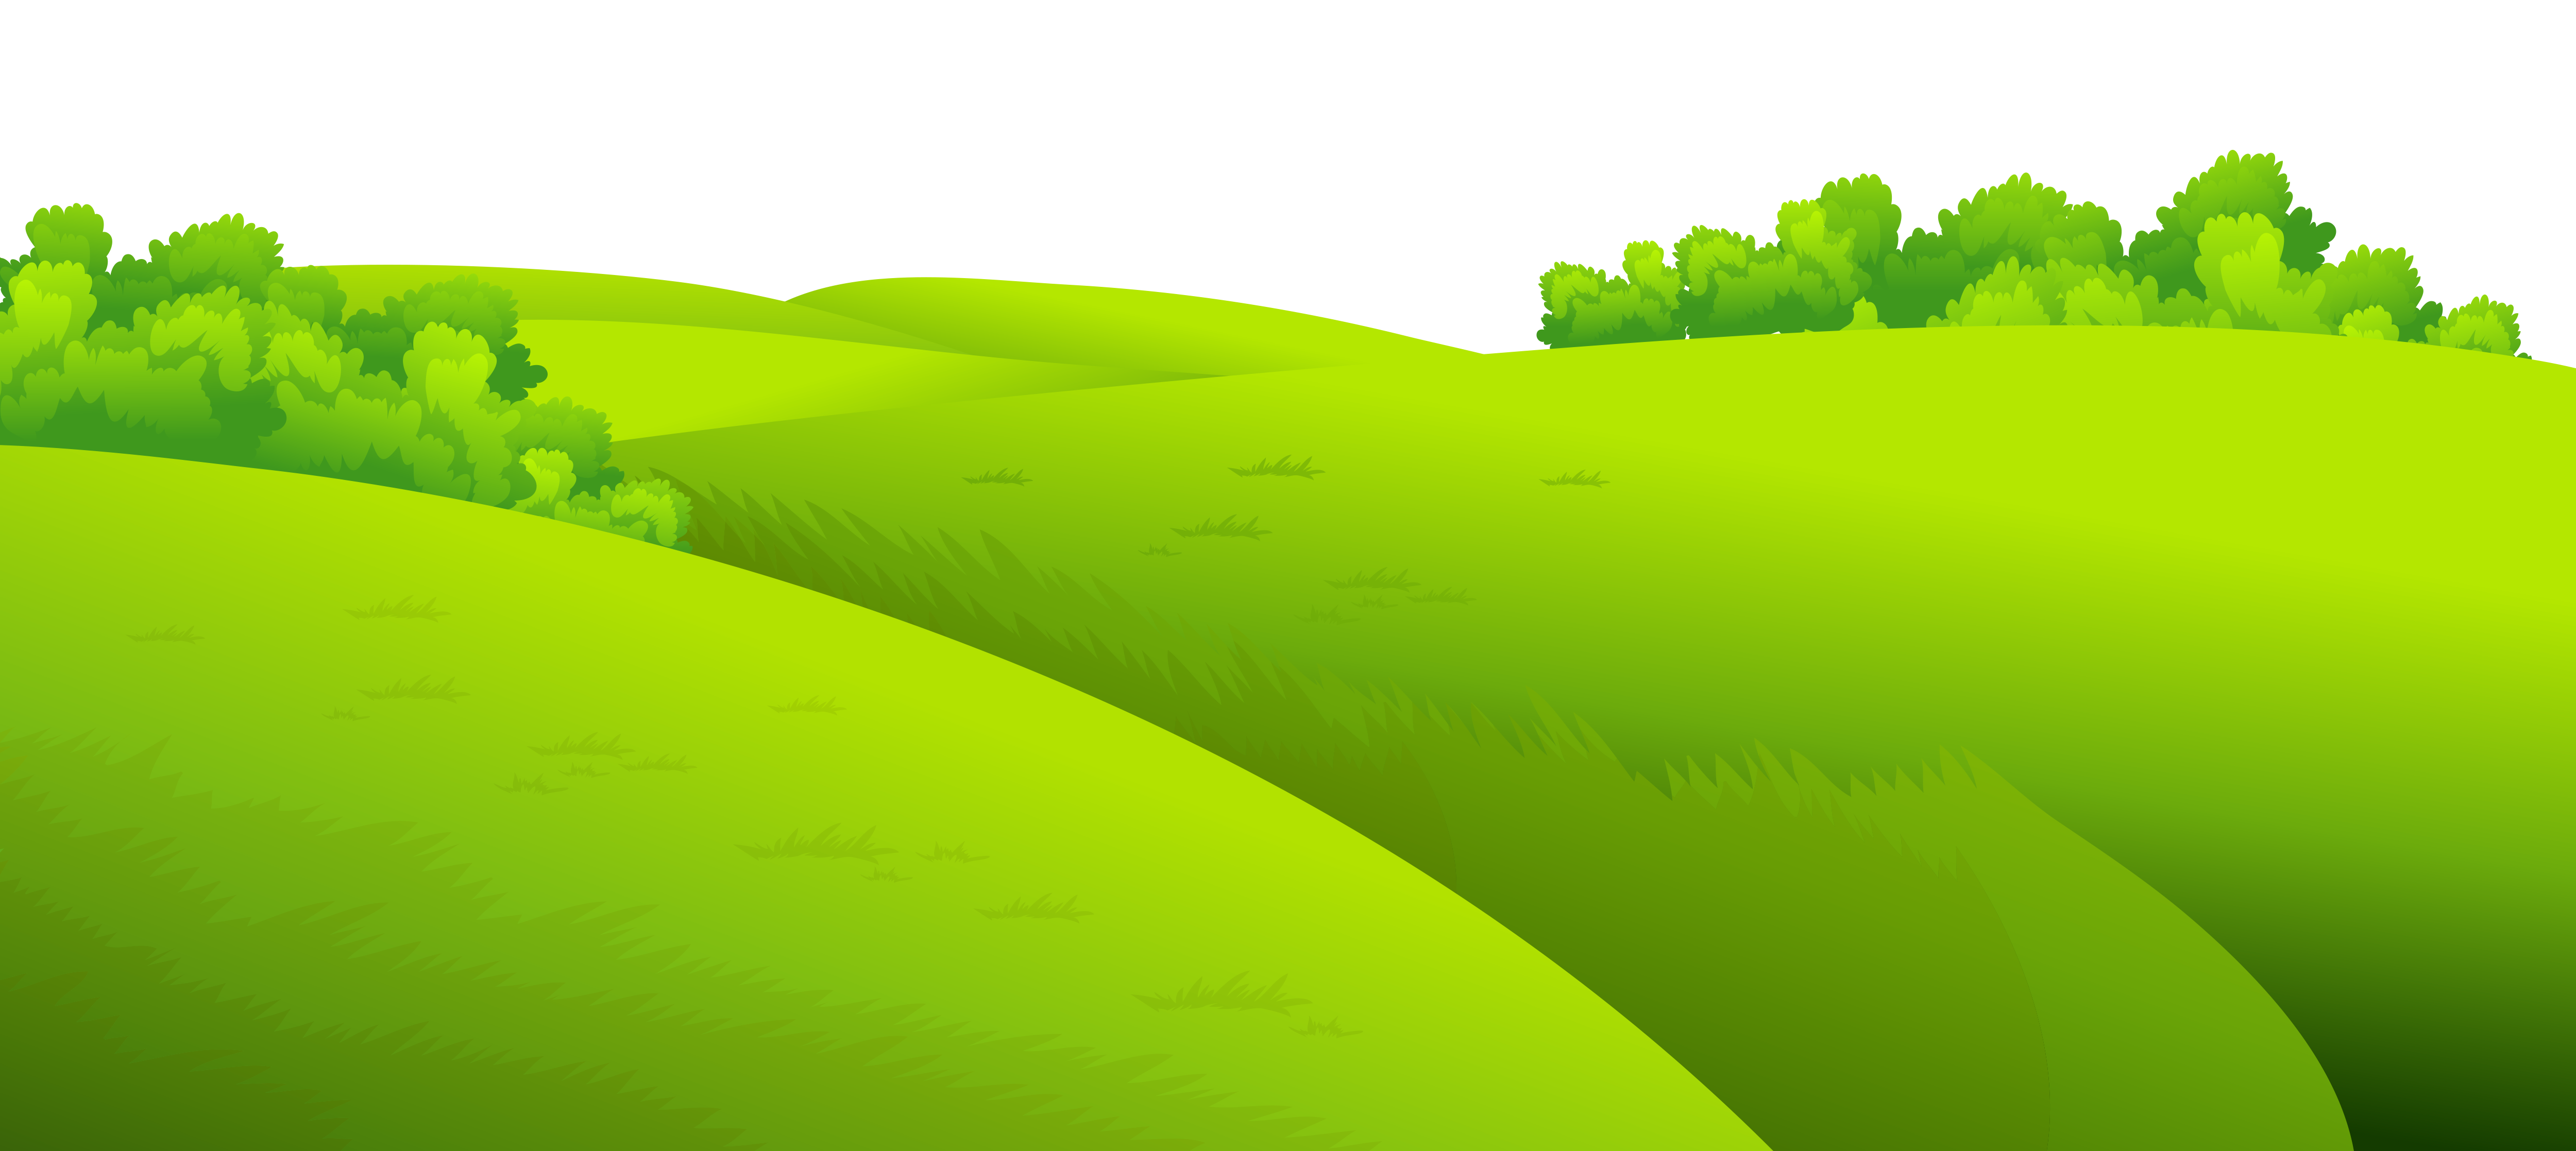 Land clipart cloud grass background. Green ground png clip